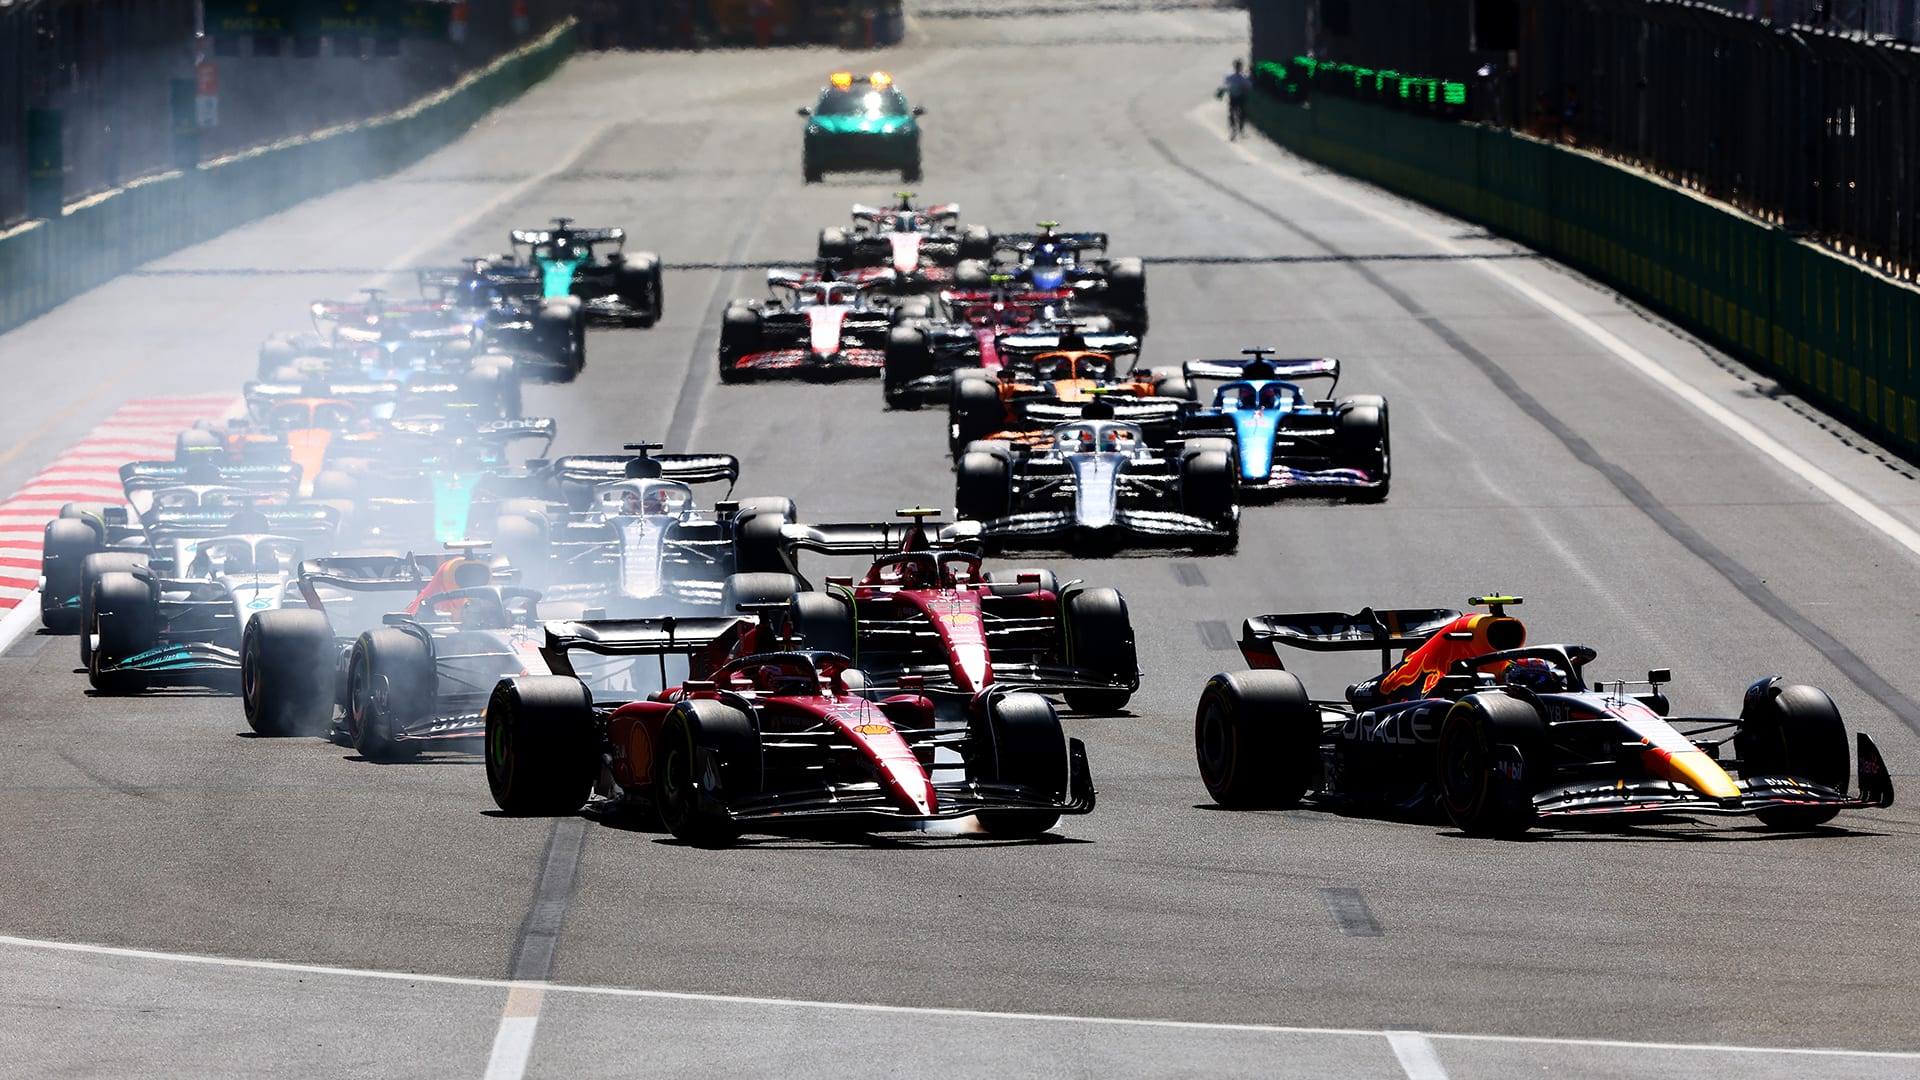 2023 F1 Sprint format rules: Everything you need to know about the